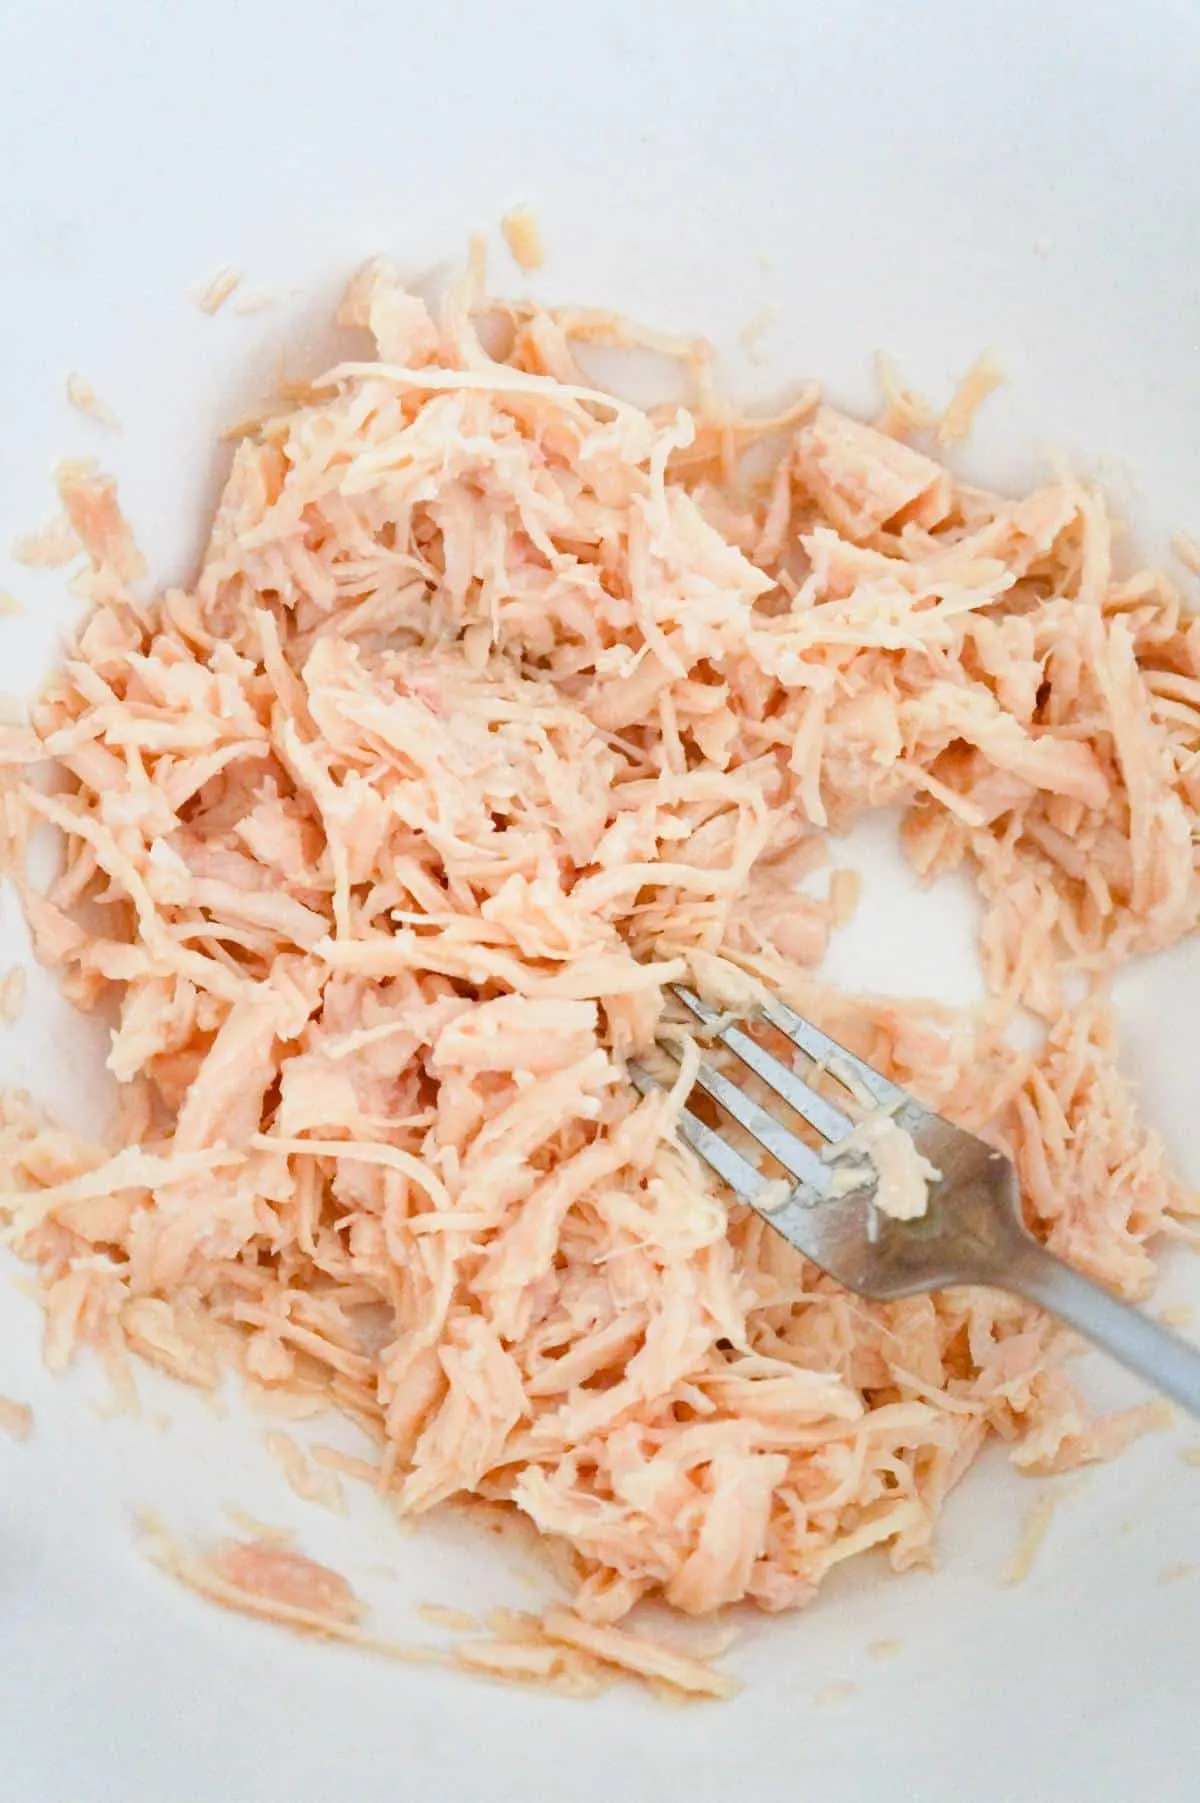 shredded canned chicken in a mixing bowl